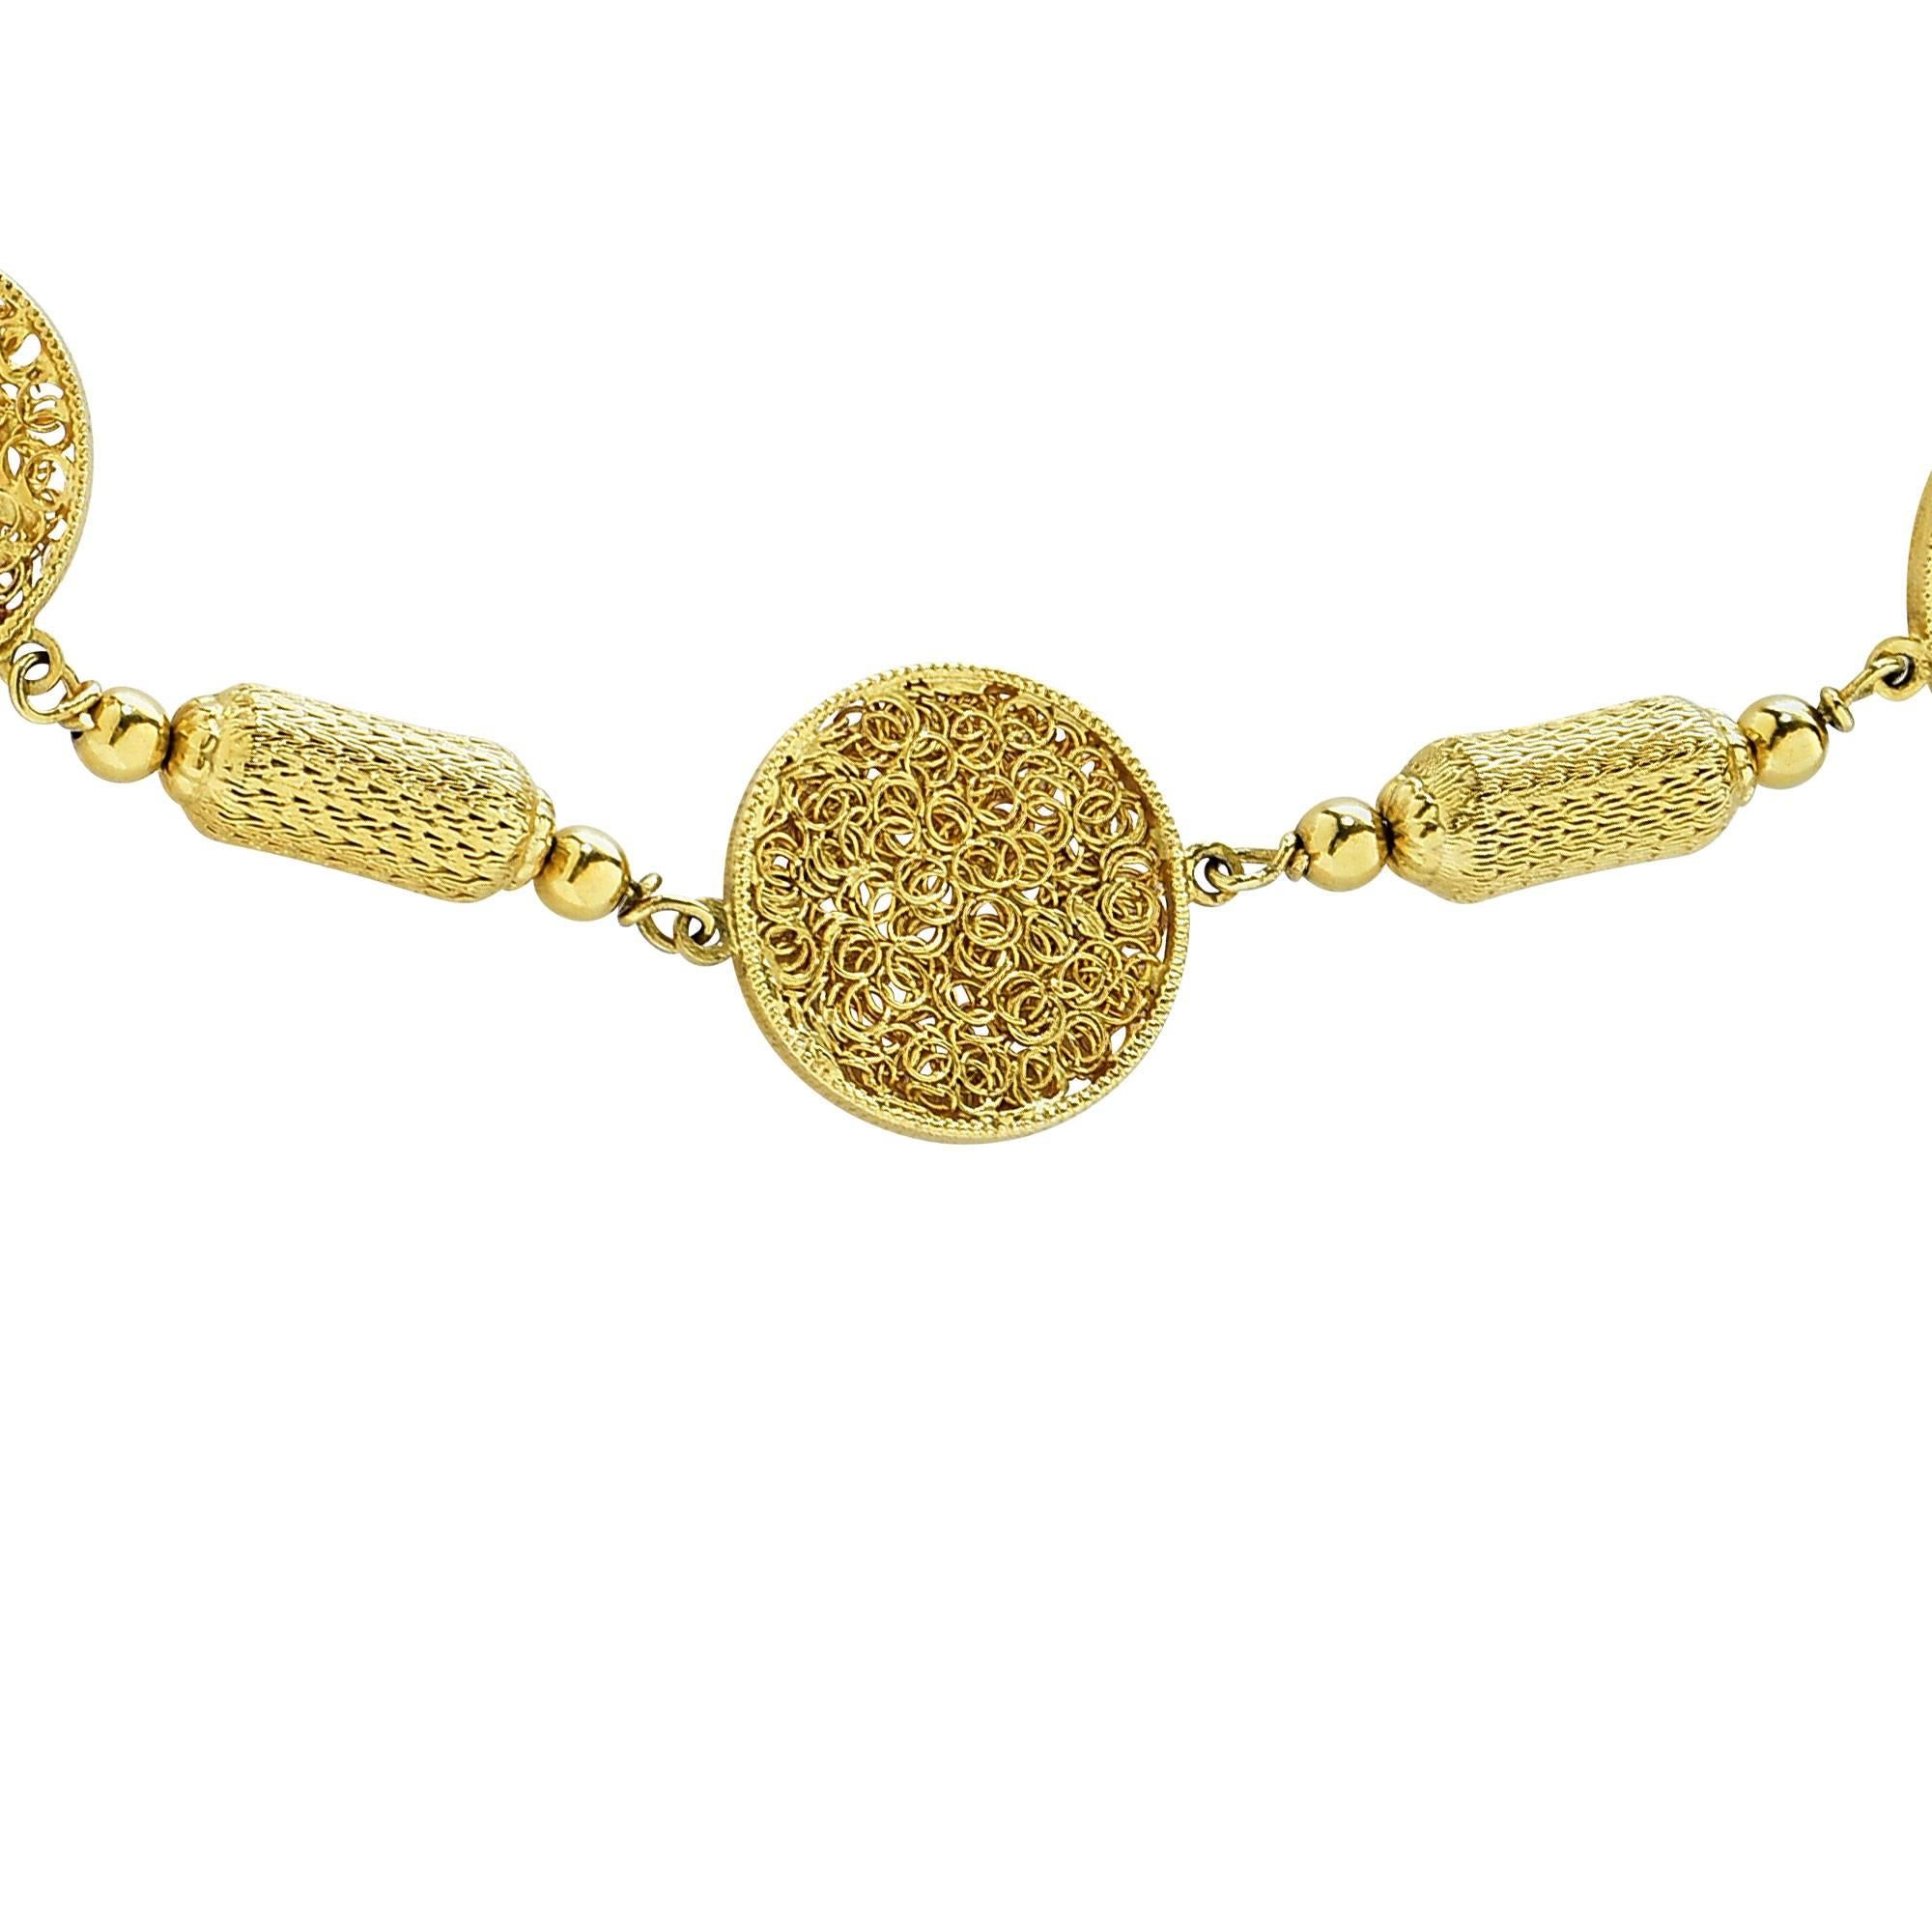 18k yellow gold necklace, custom made in Italy, highlighting intricate gold wire circular pieces alternating with hand etched and woven gold bars.

This necklace is a work of art and measures 28 inches in length.
It is stamped and tested as 18k